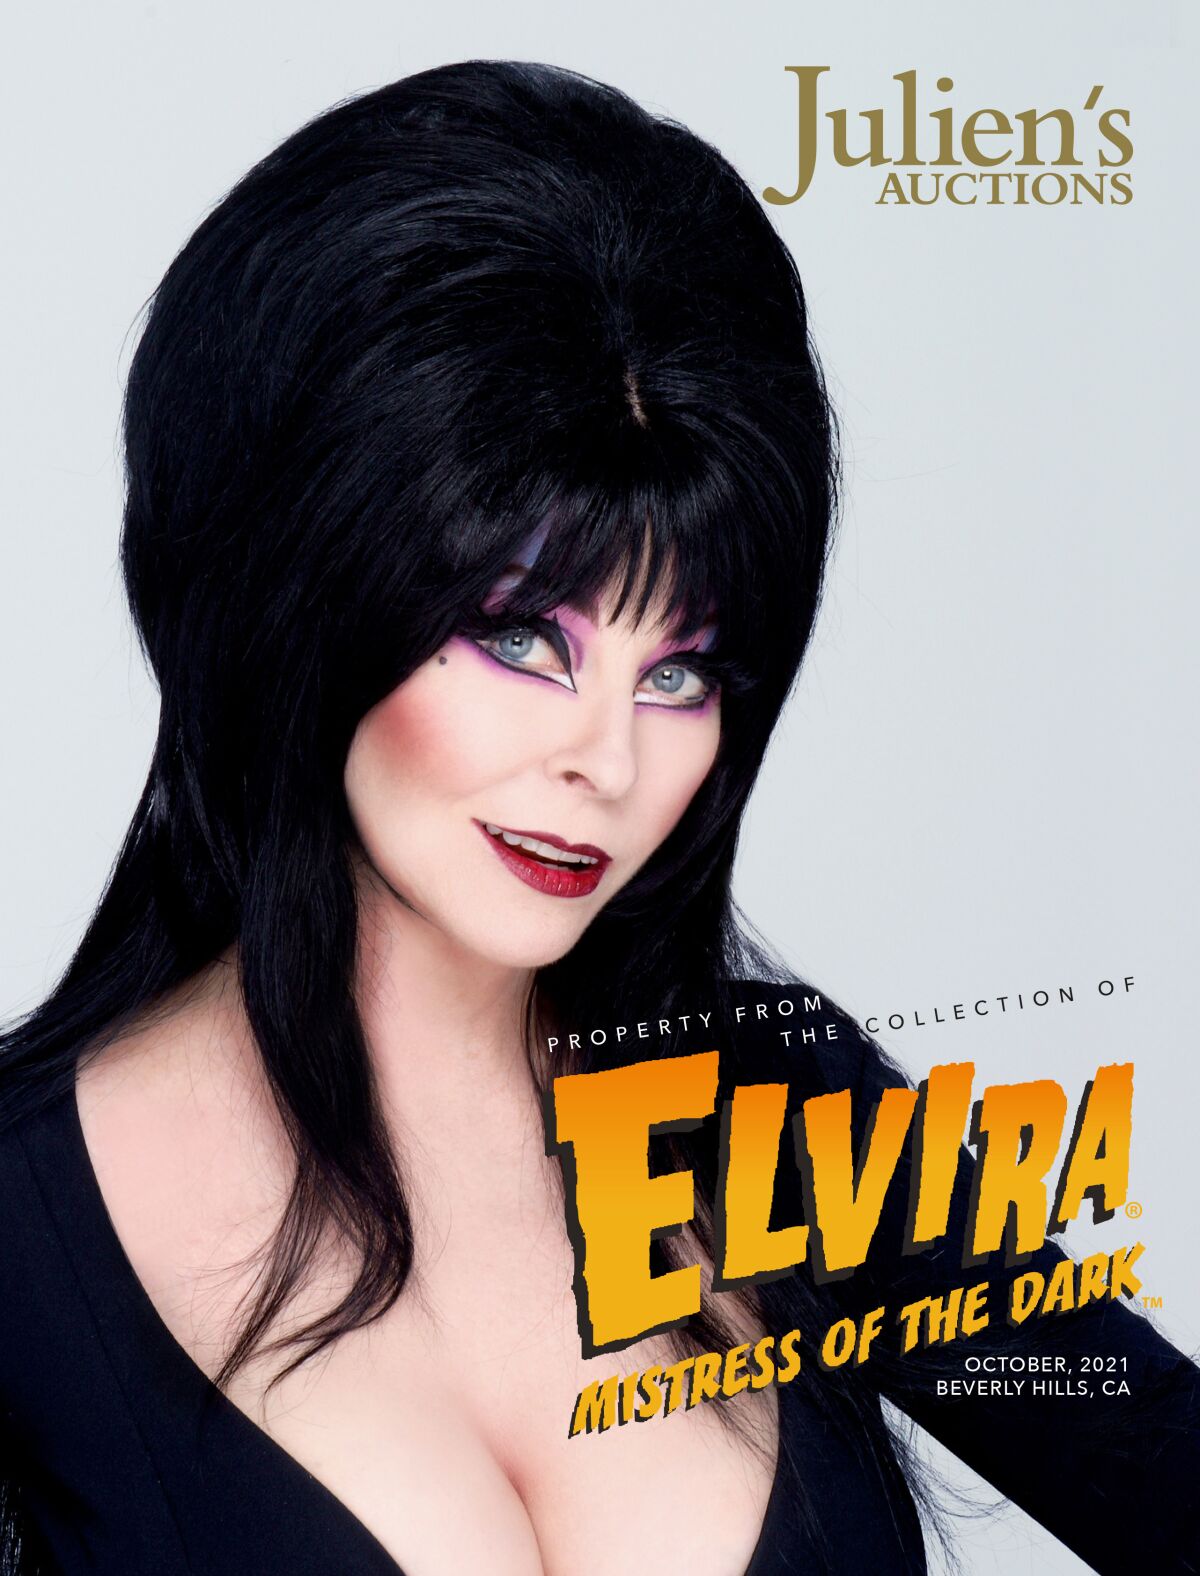 The catalog for Elvira's Julien's Auctions collection